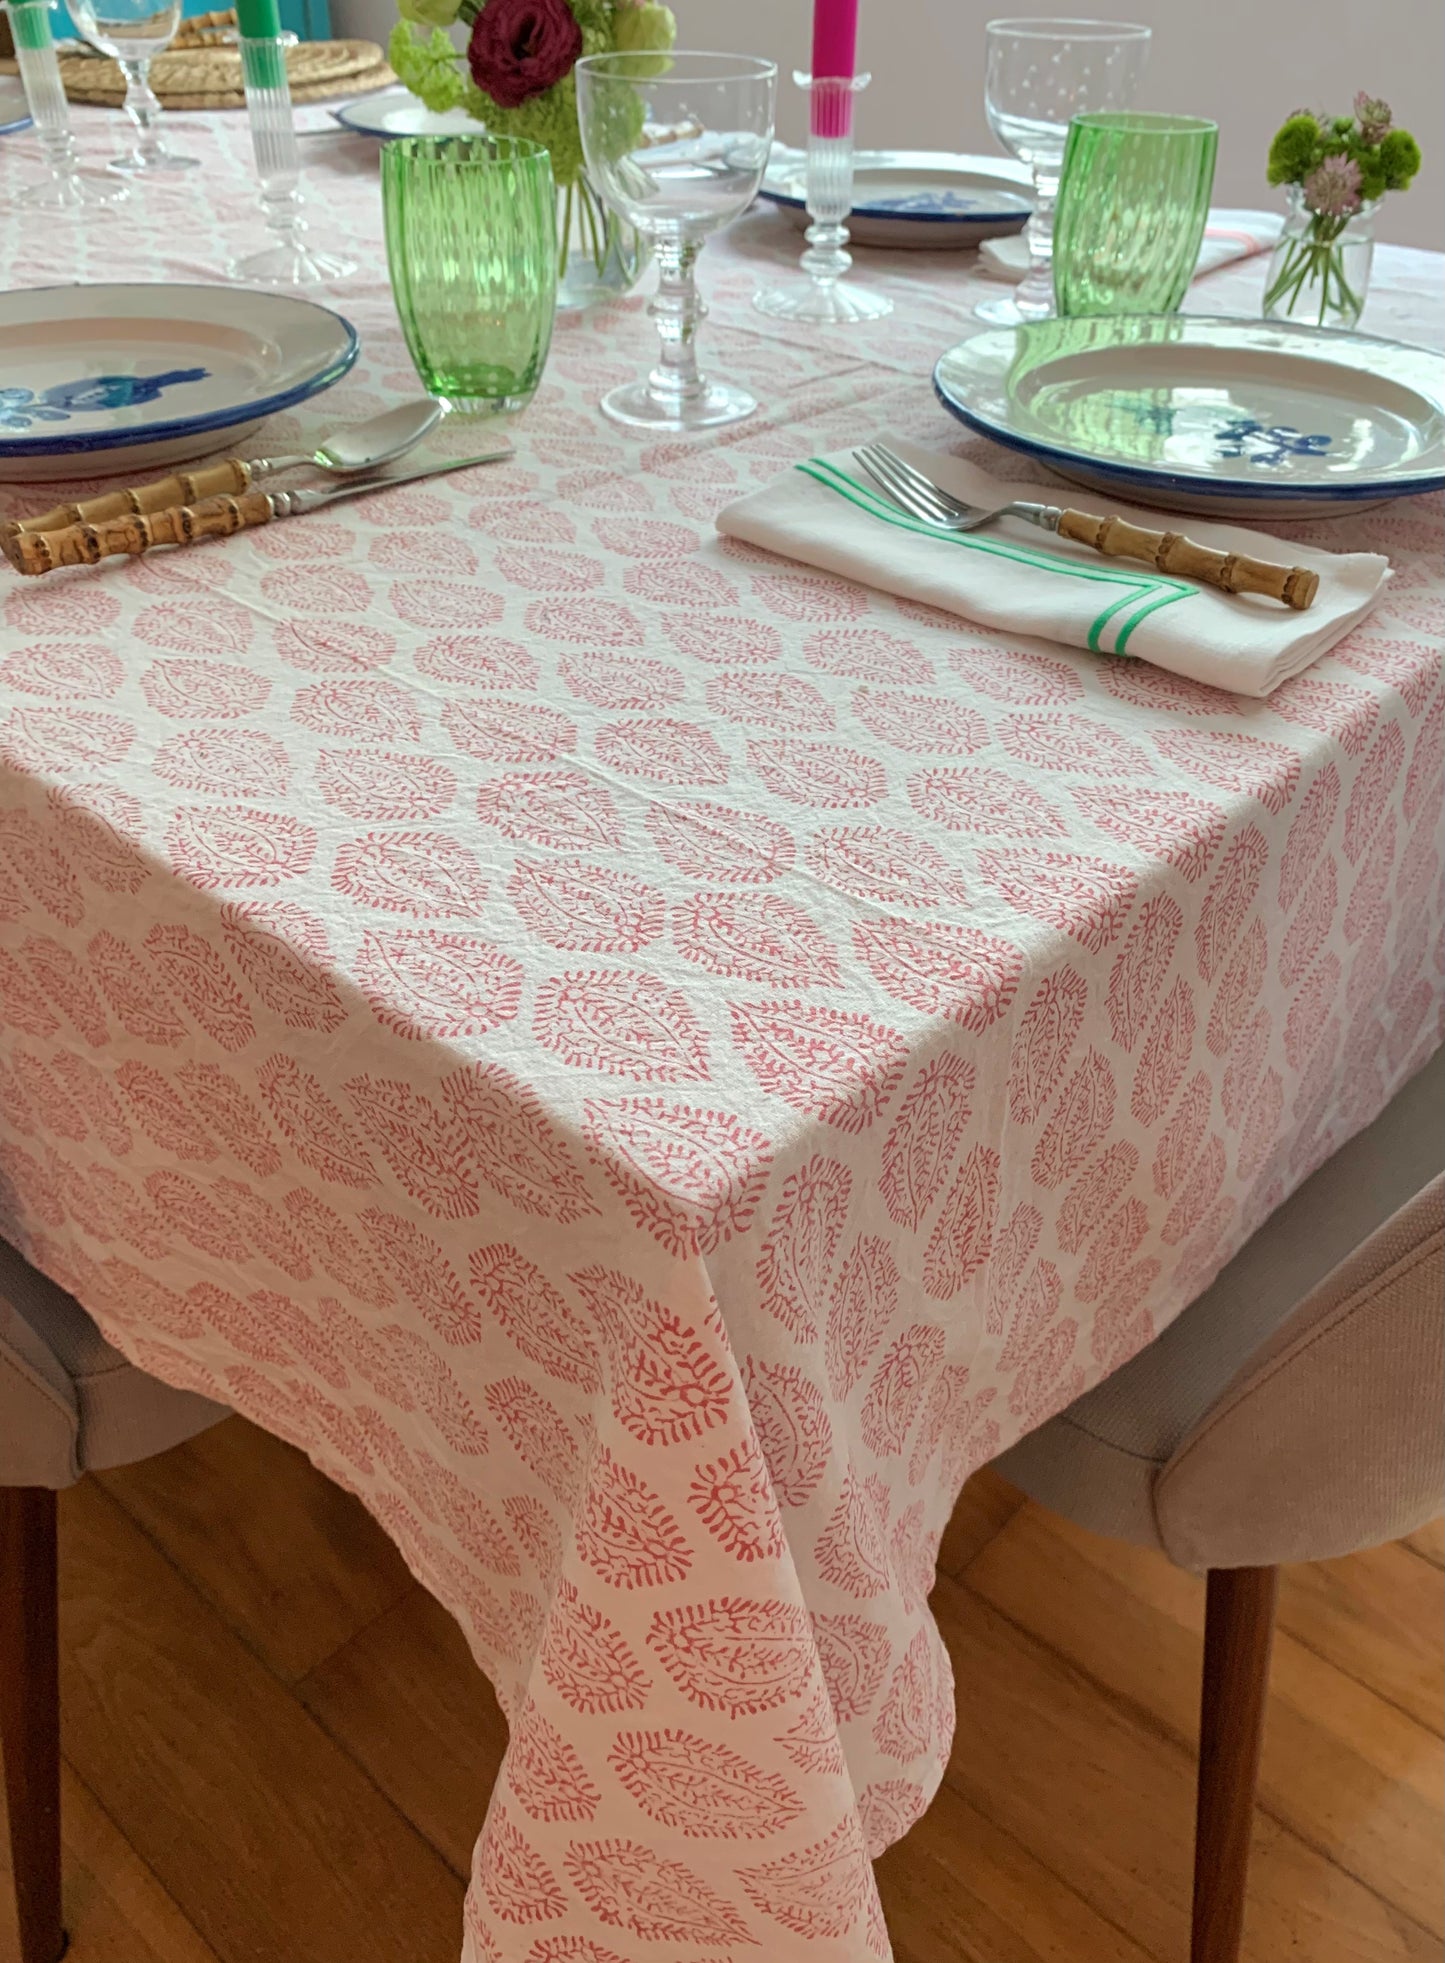 A pink block printed tablecloth laid with plates, wine glasses and green glass tumblers.